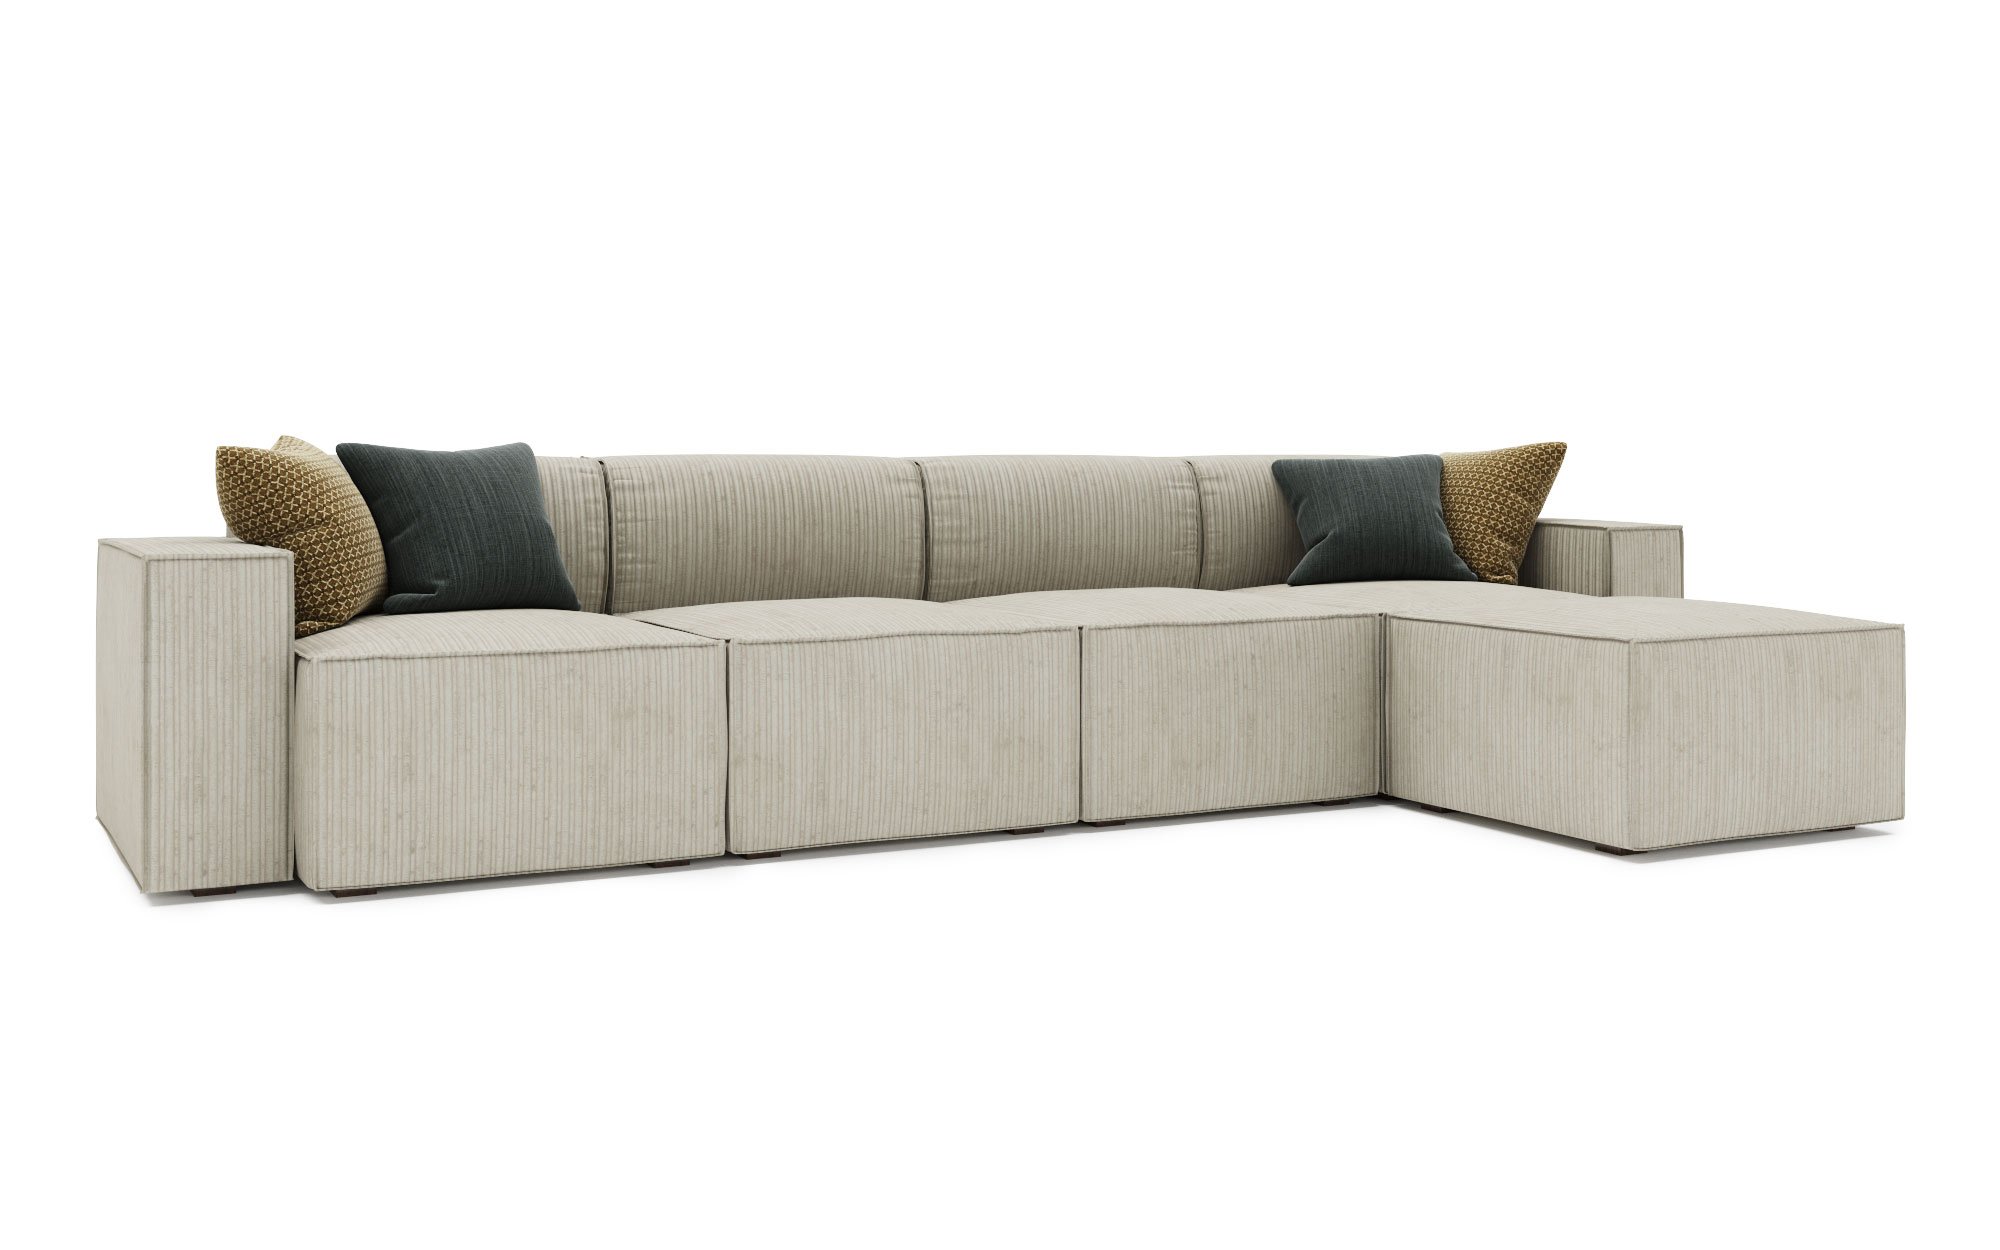 Cube 4 Seater Chaise